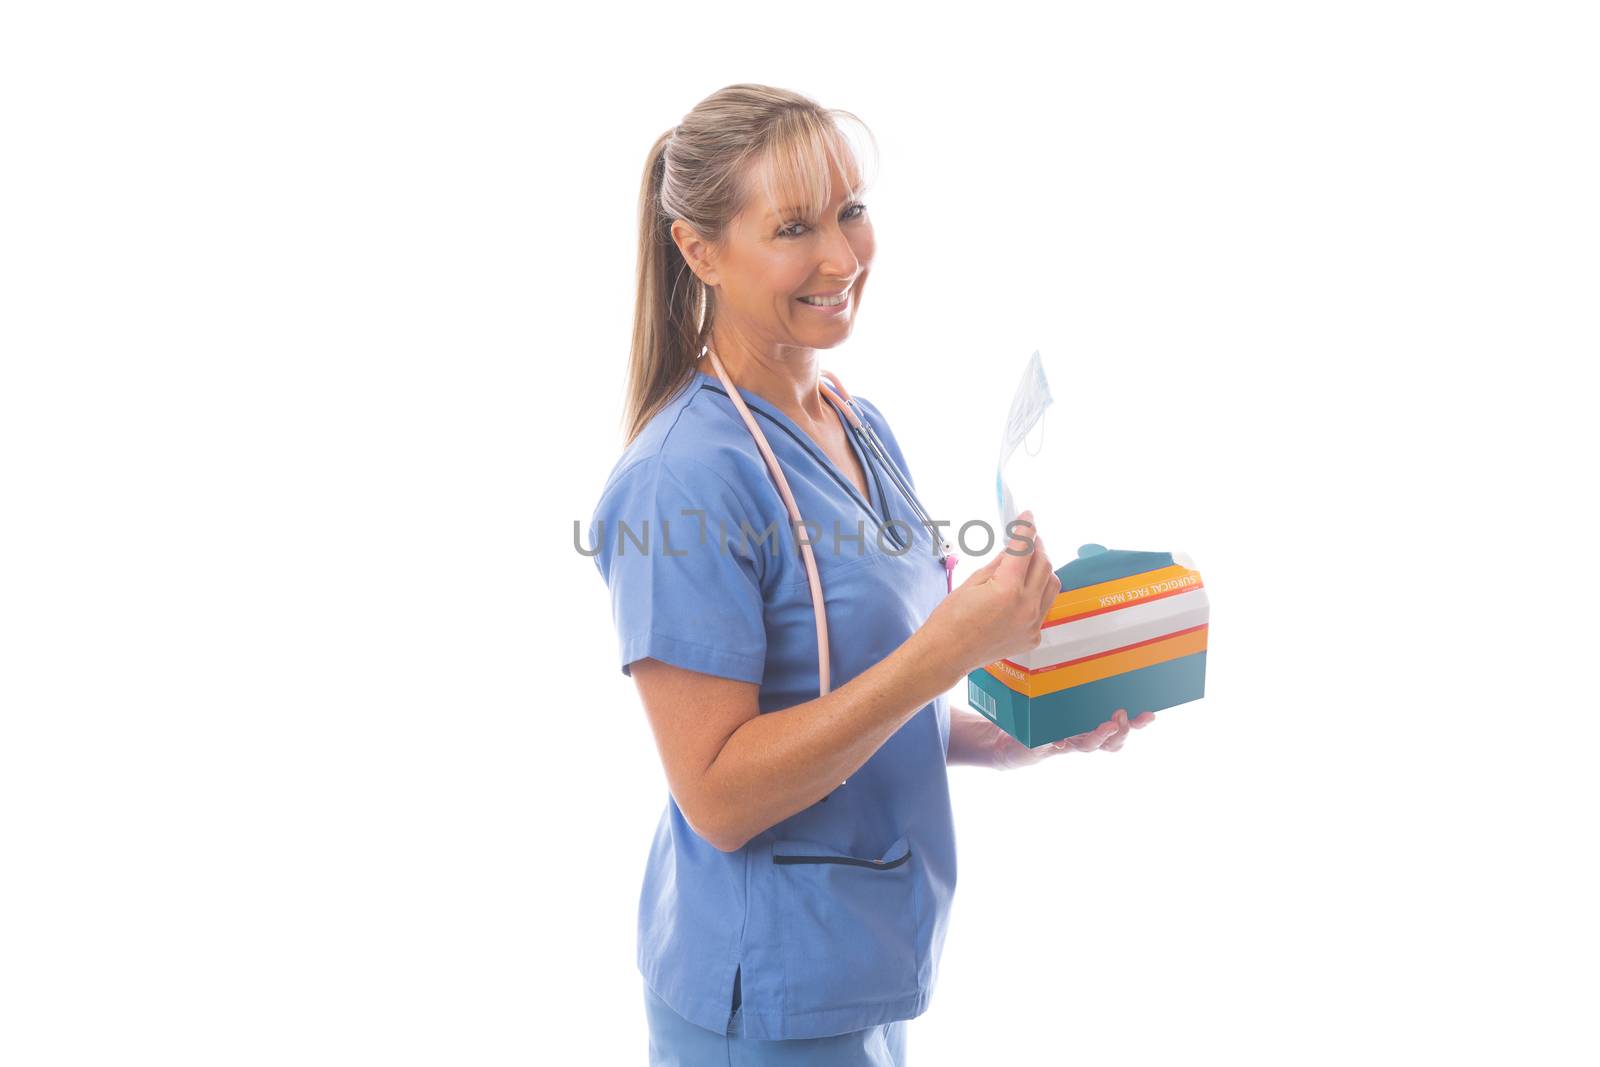 Doctor, nurse or other healthcare worker holds a box of surgical face masks.  During coronavirus pandemic, healthcare workers were in short supply of protective PPE like masks.